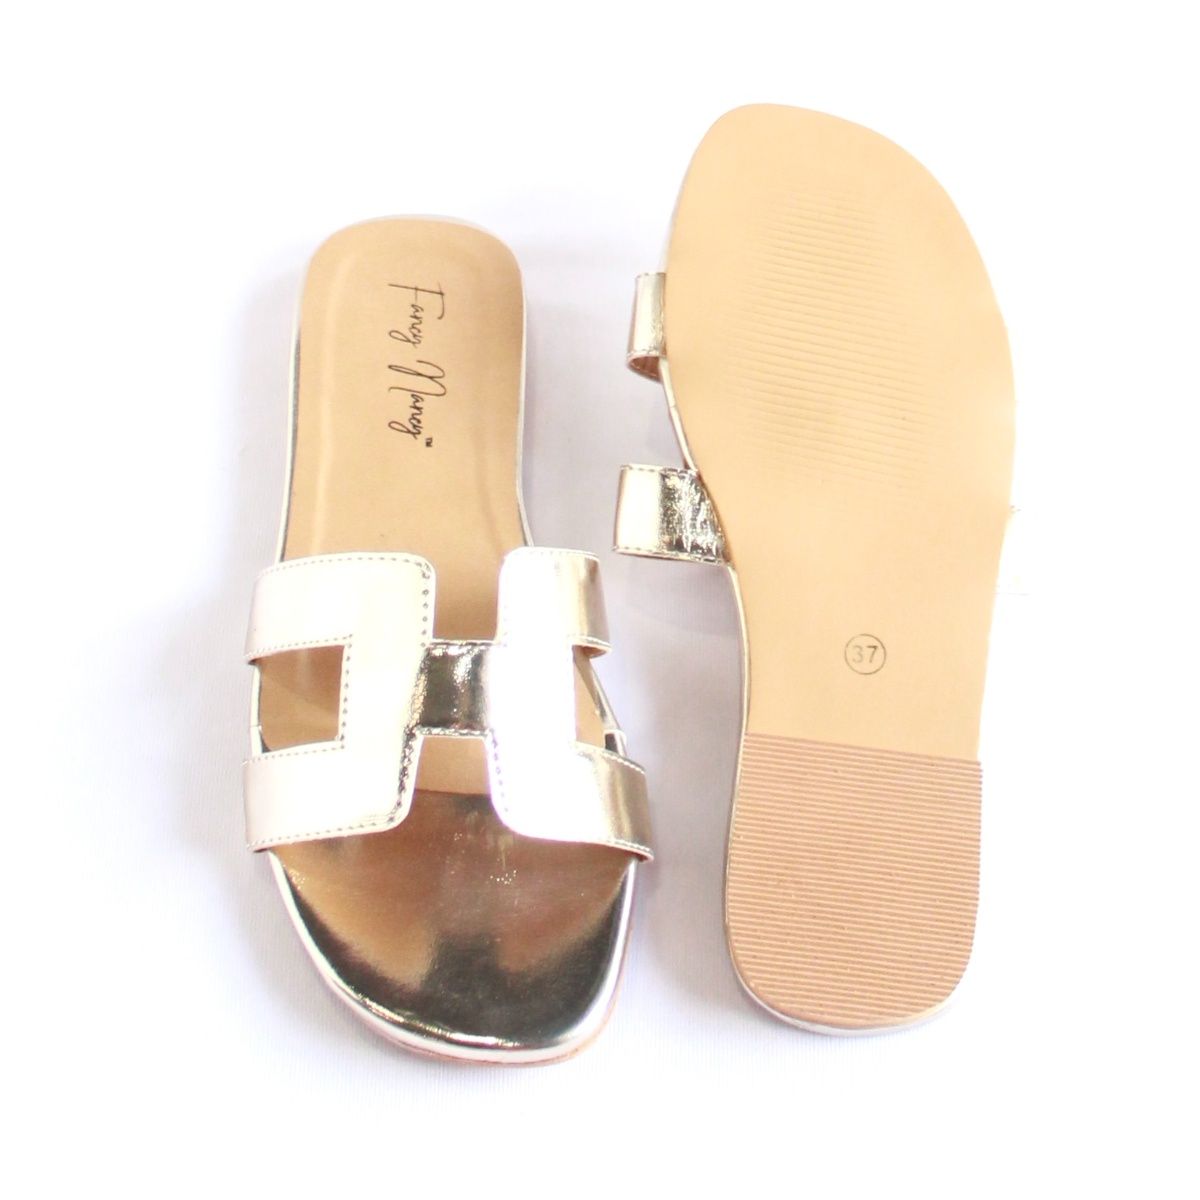 Buy Clarks - Womens Arla Glison H Sandals at Ubuy India